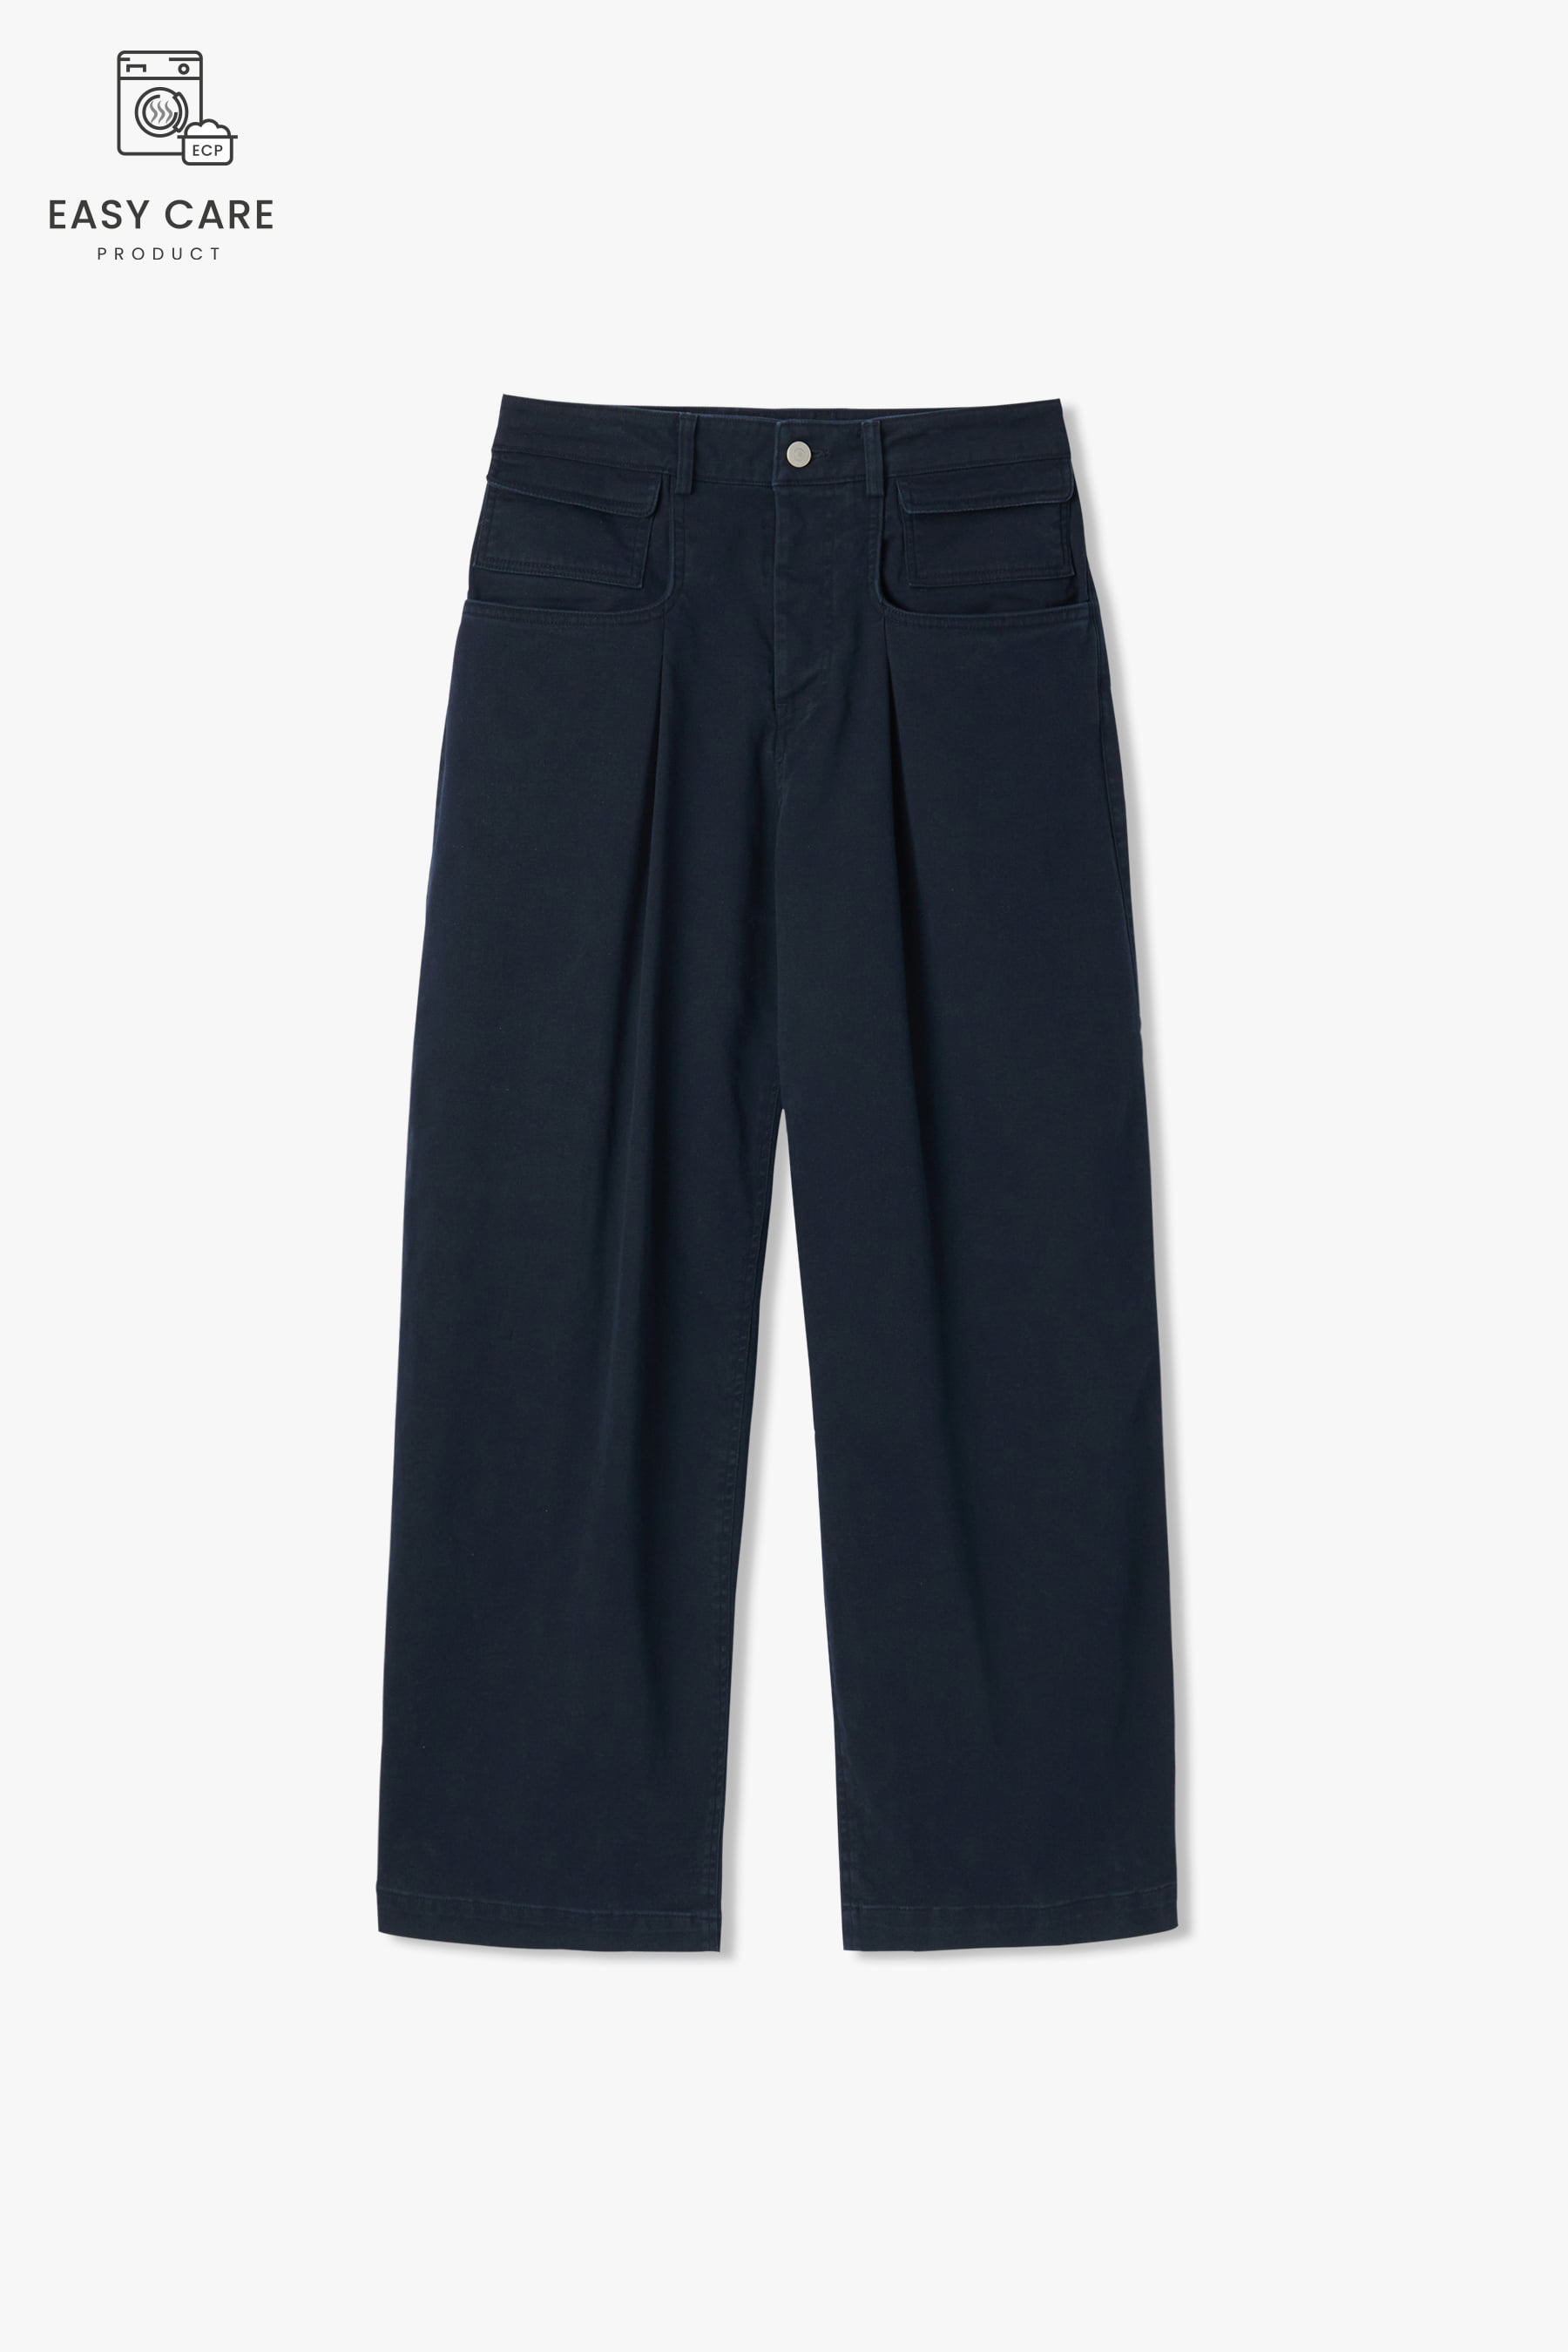 NAVY ROLL UP FLEXIBLE(R.U.F) WIDE WASHED CHINO PANTS (ECP GARMENT PROCESS)